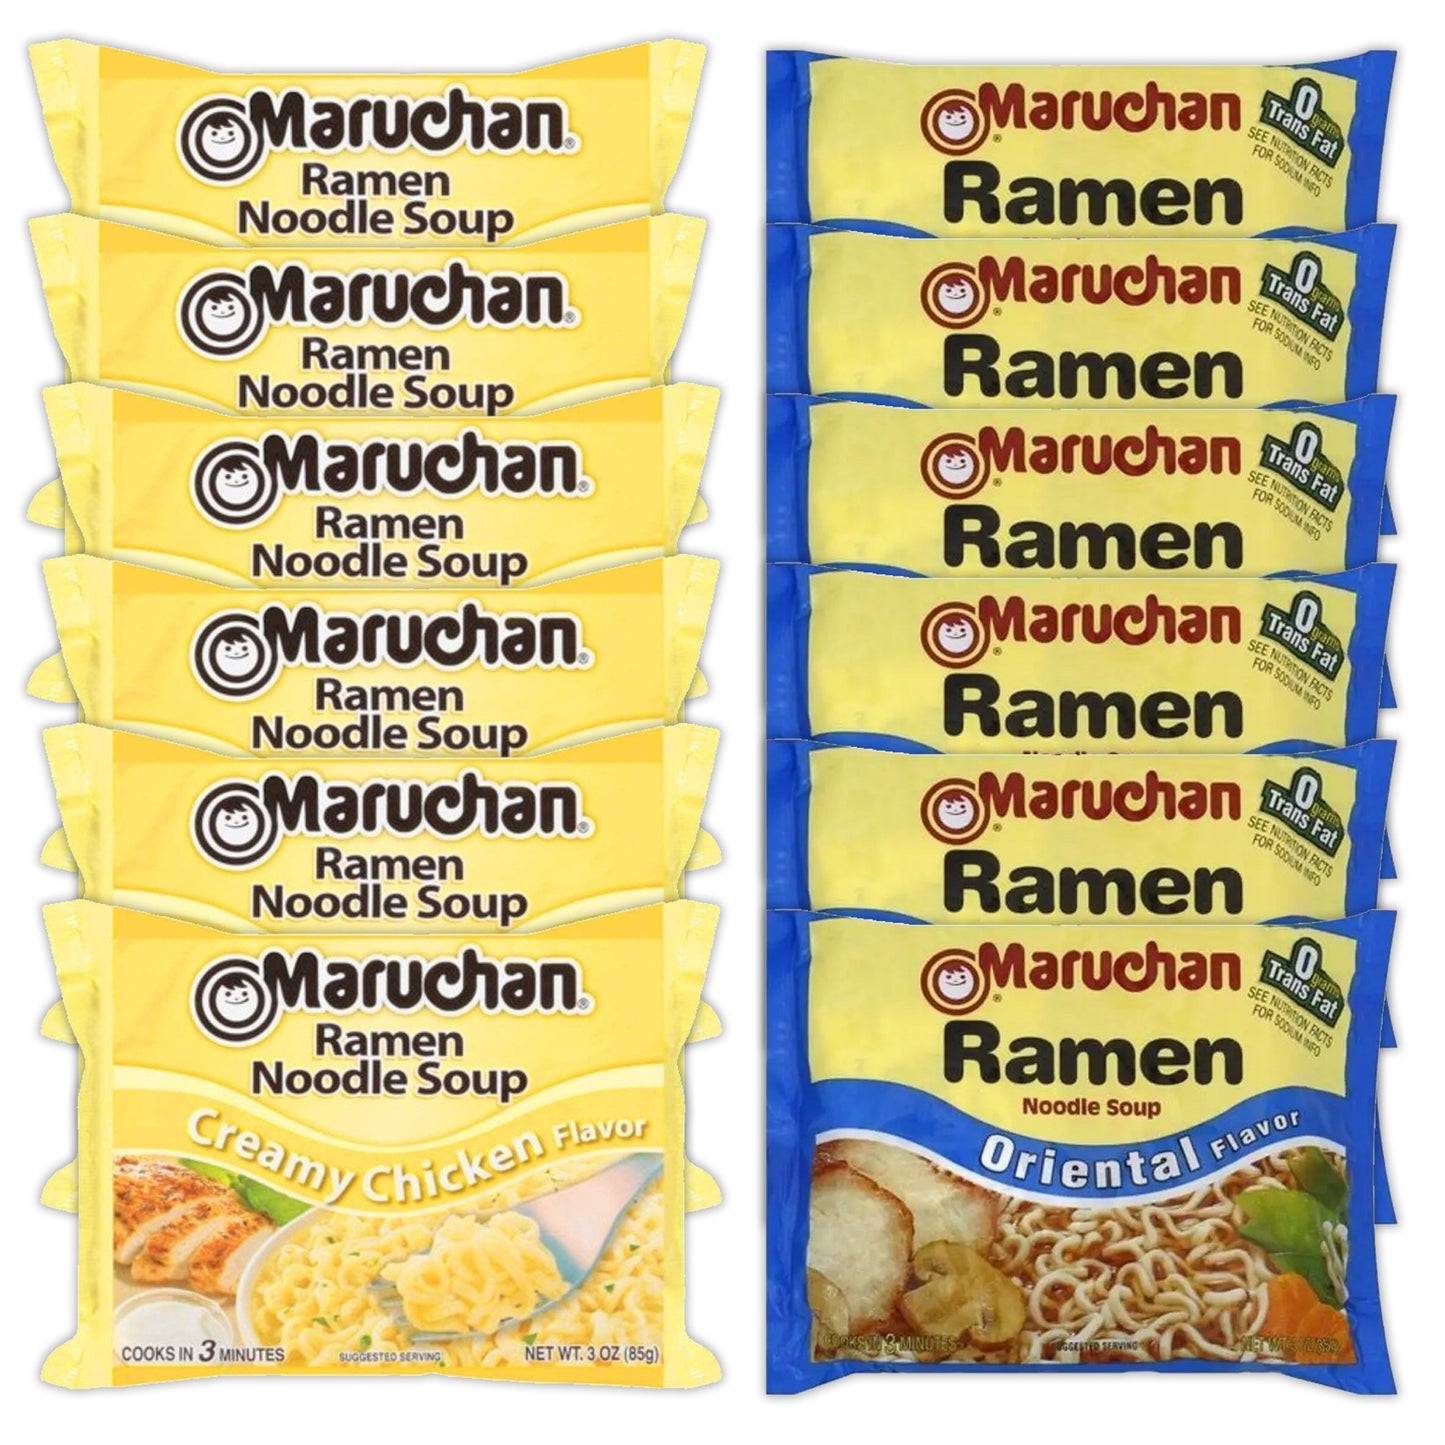 Maruchan Ramen Instant Noodle Soup Variety, 2 Flavors - 6 Packs Creamy Chicken & 6 Packs Soy Sauce , 3 Ounce Single Servings Lunch / Dinner Variety